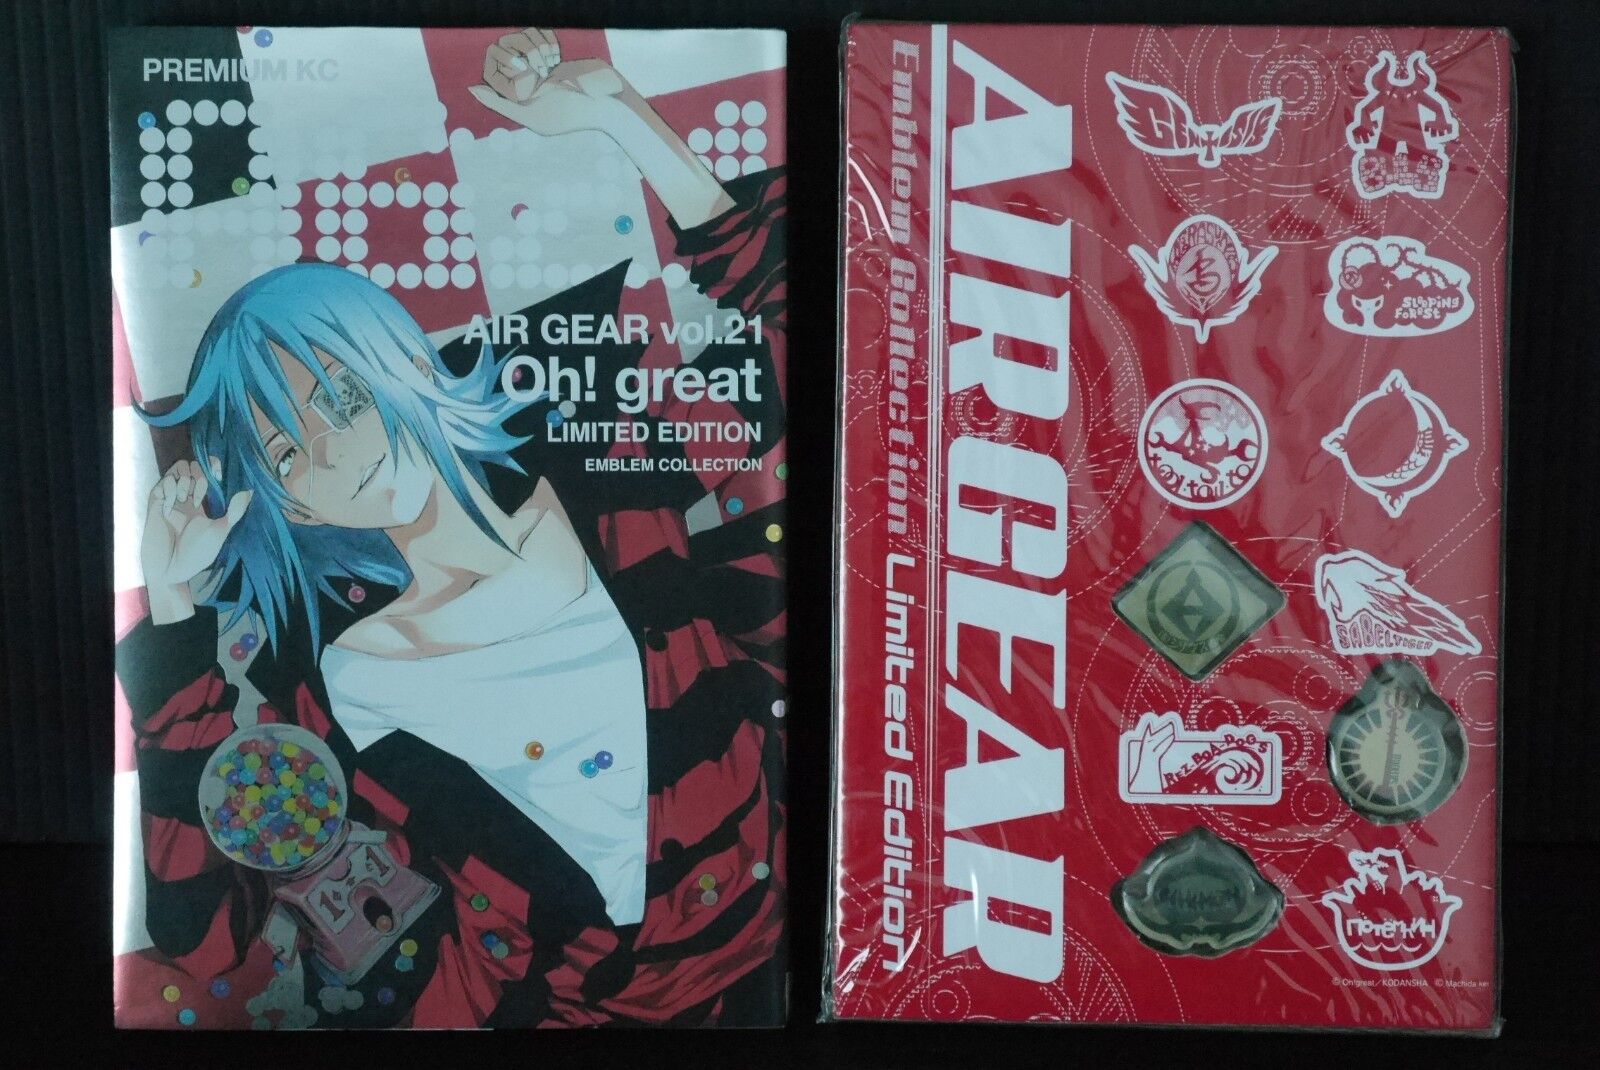 Air Gear Vol.21 Limited Edition Manga by Oh great - Japanese Original